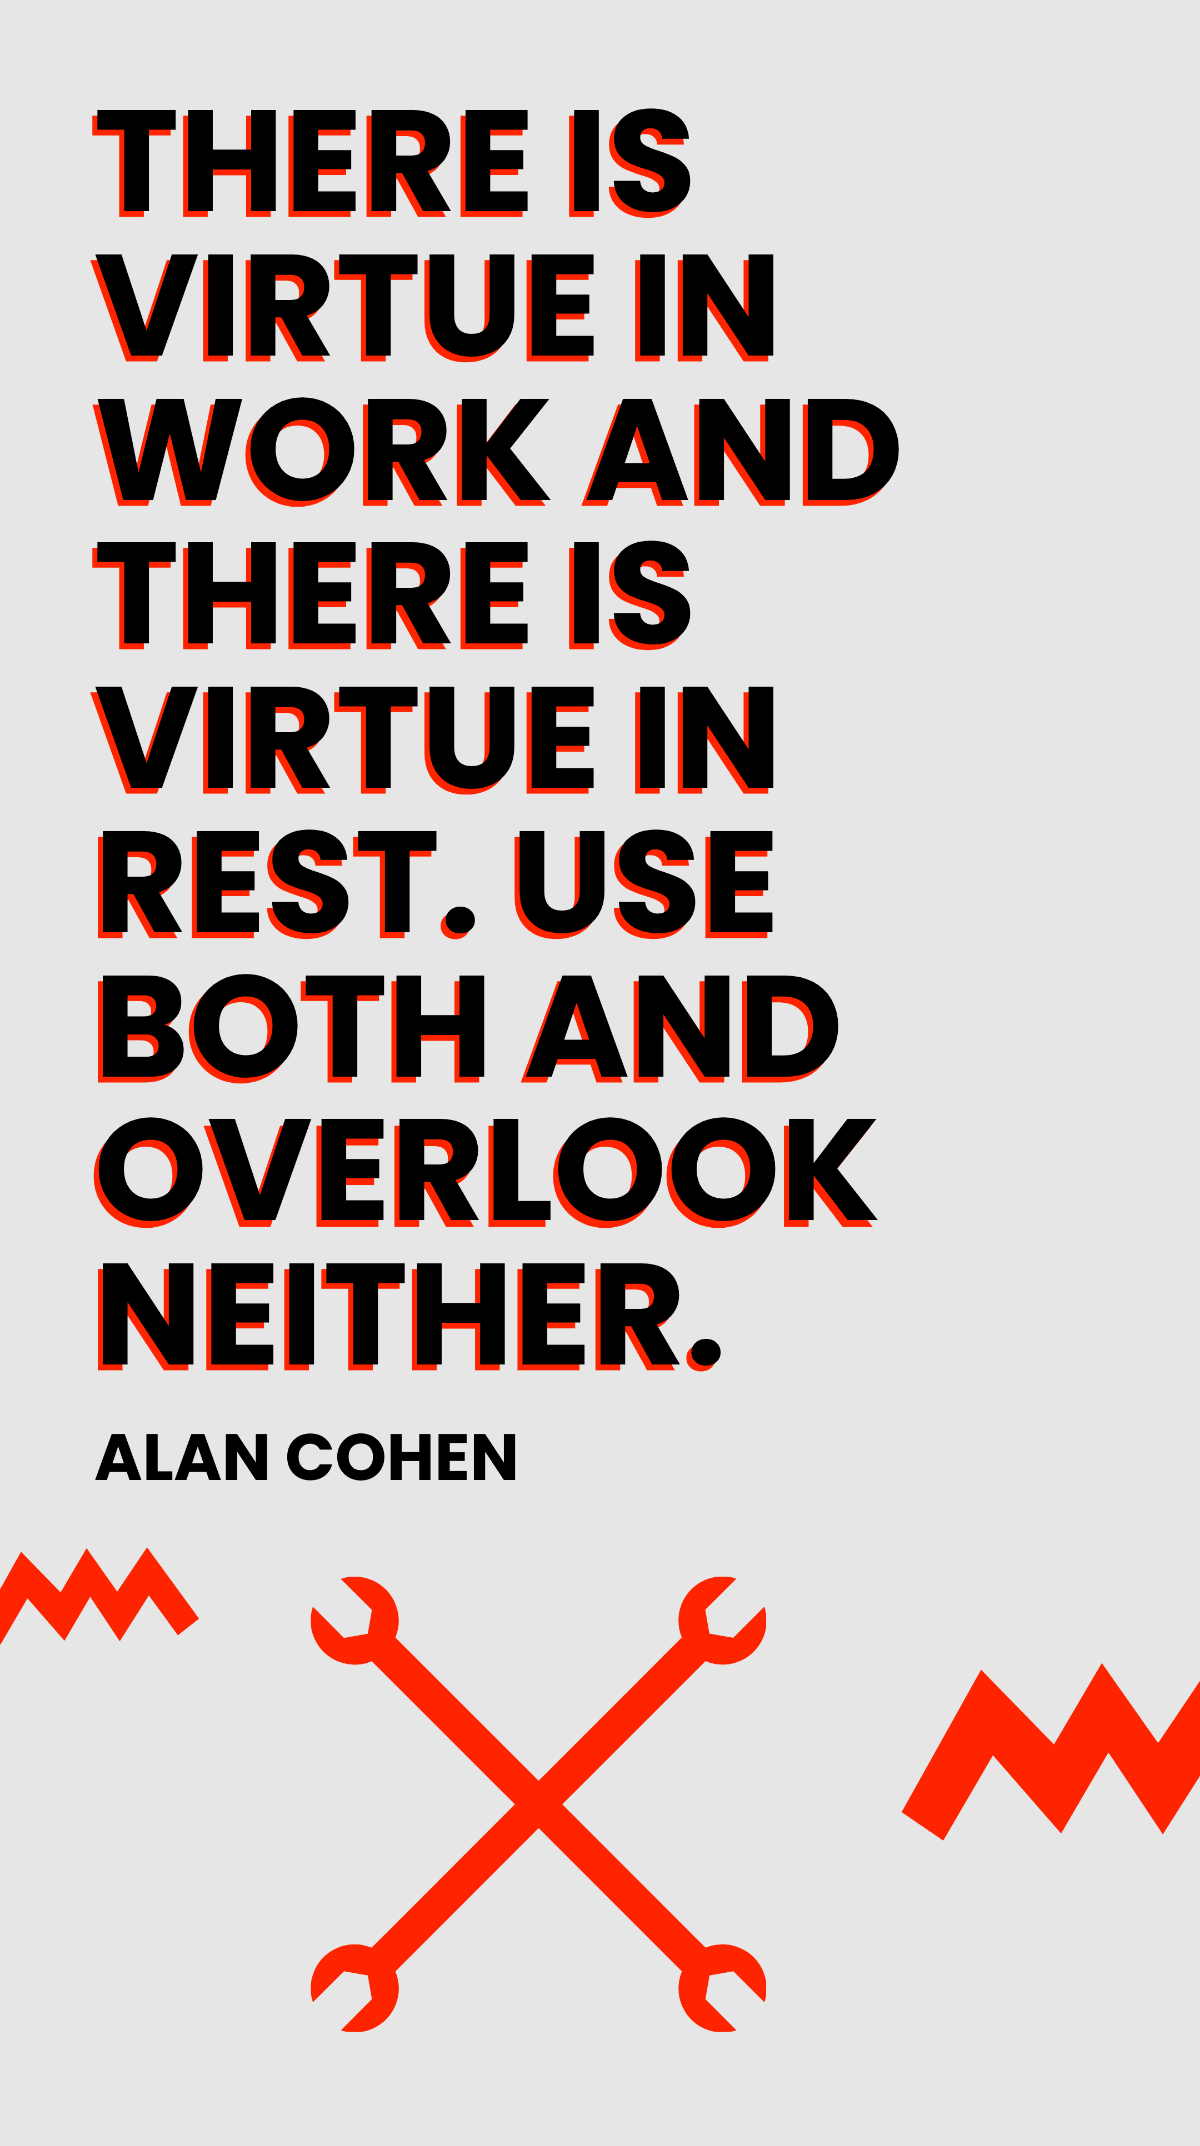 Alan Cohen - There is virtue in work and there is virtue in rest. Use both and overlook neither. Template